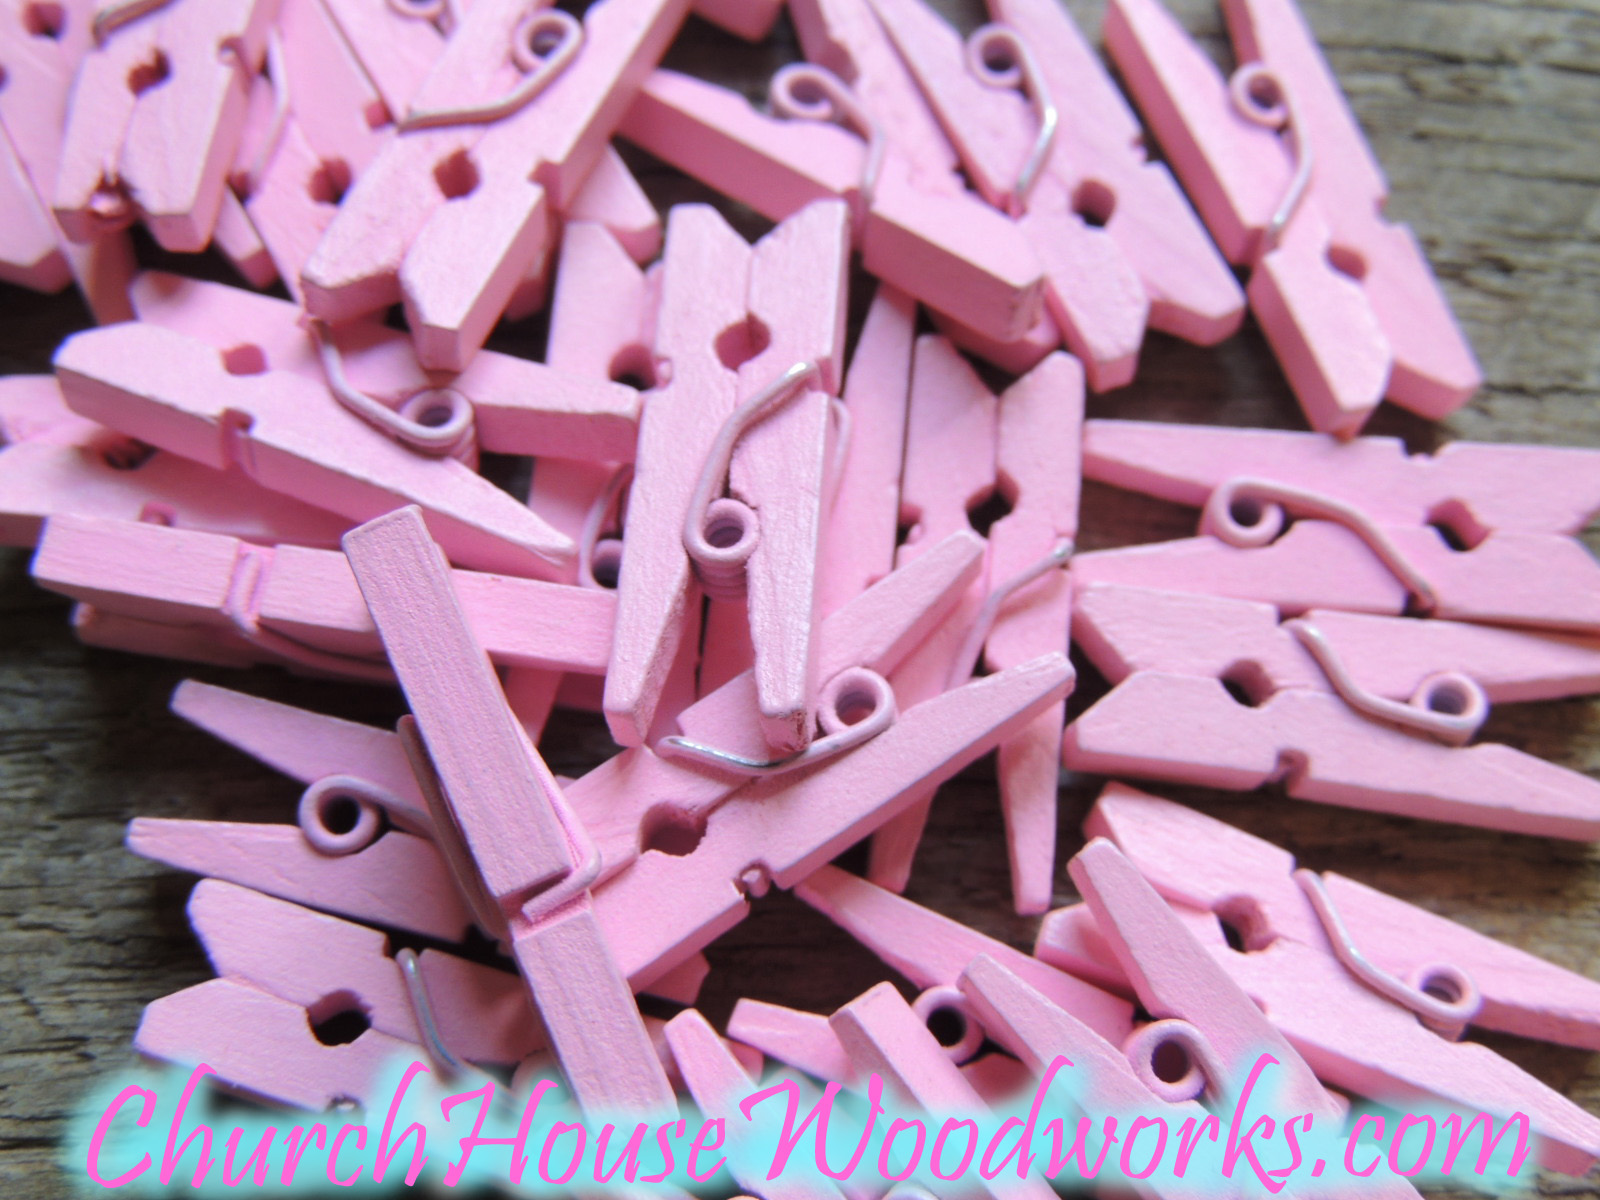 Mini Clothespins in Light Purple - 25 - 1 or 2.5 cm - Wooden